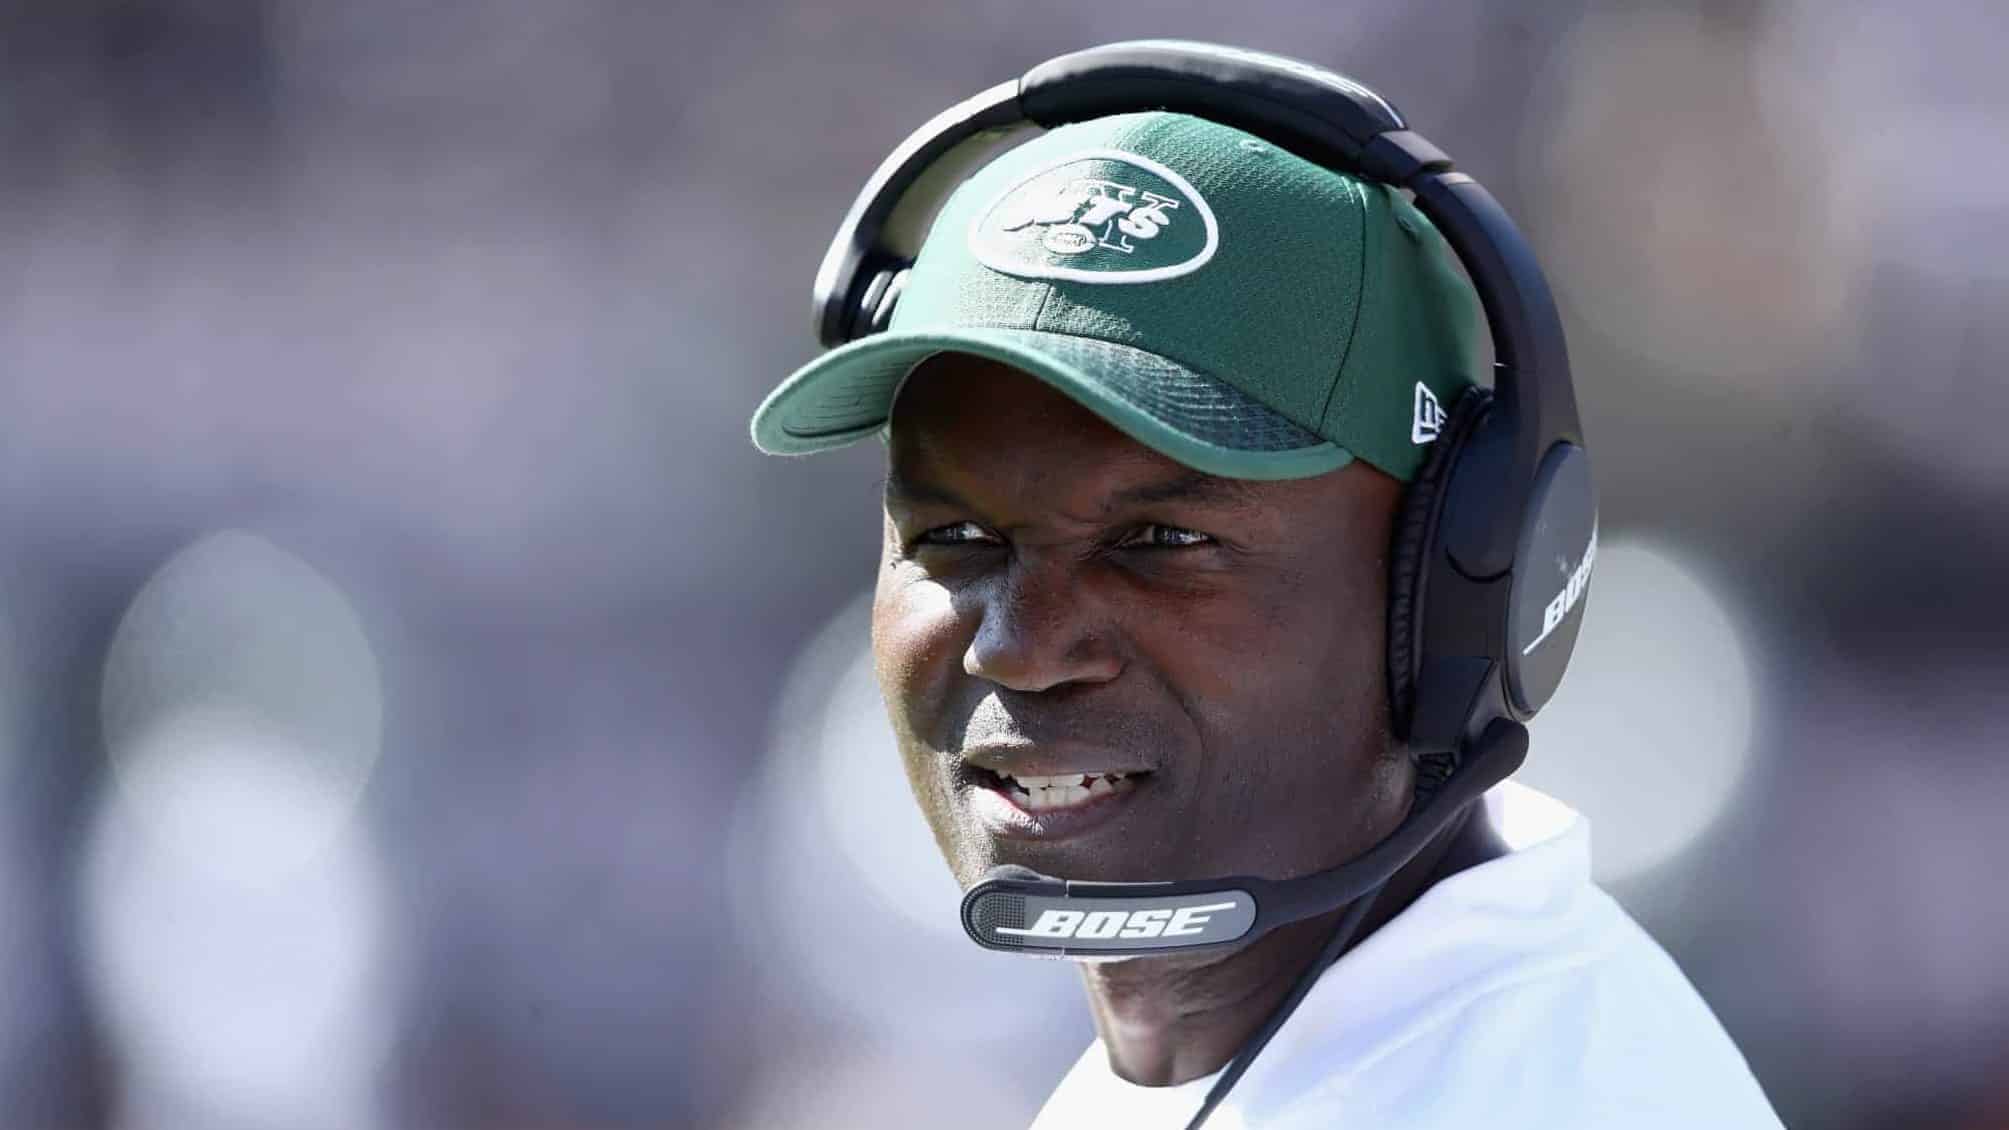 Todd Bowles, New York Jets